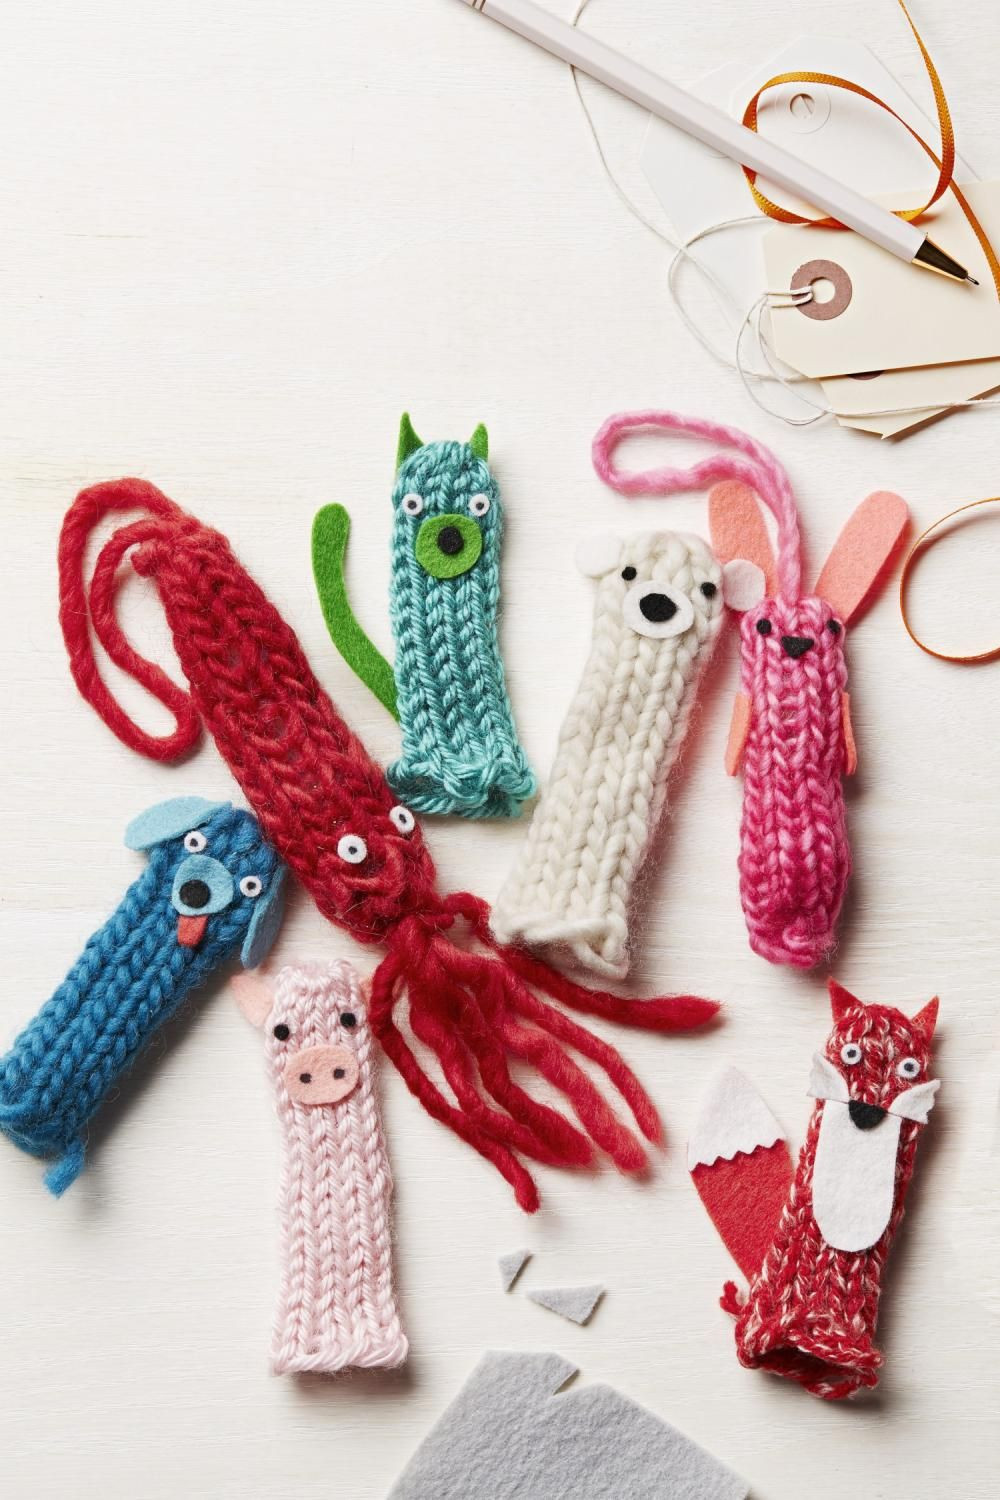 Crafts To Do With Toddlers
 7 Easy No Knit Yarn Crafts